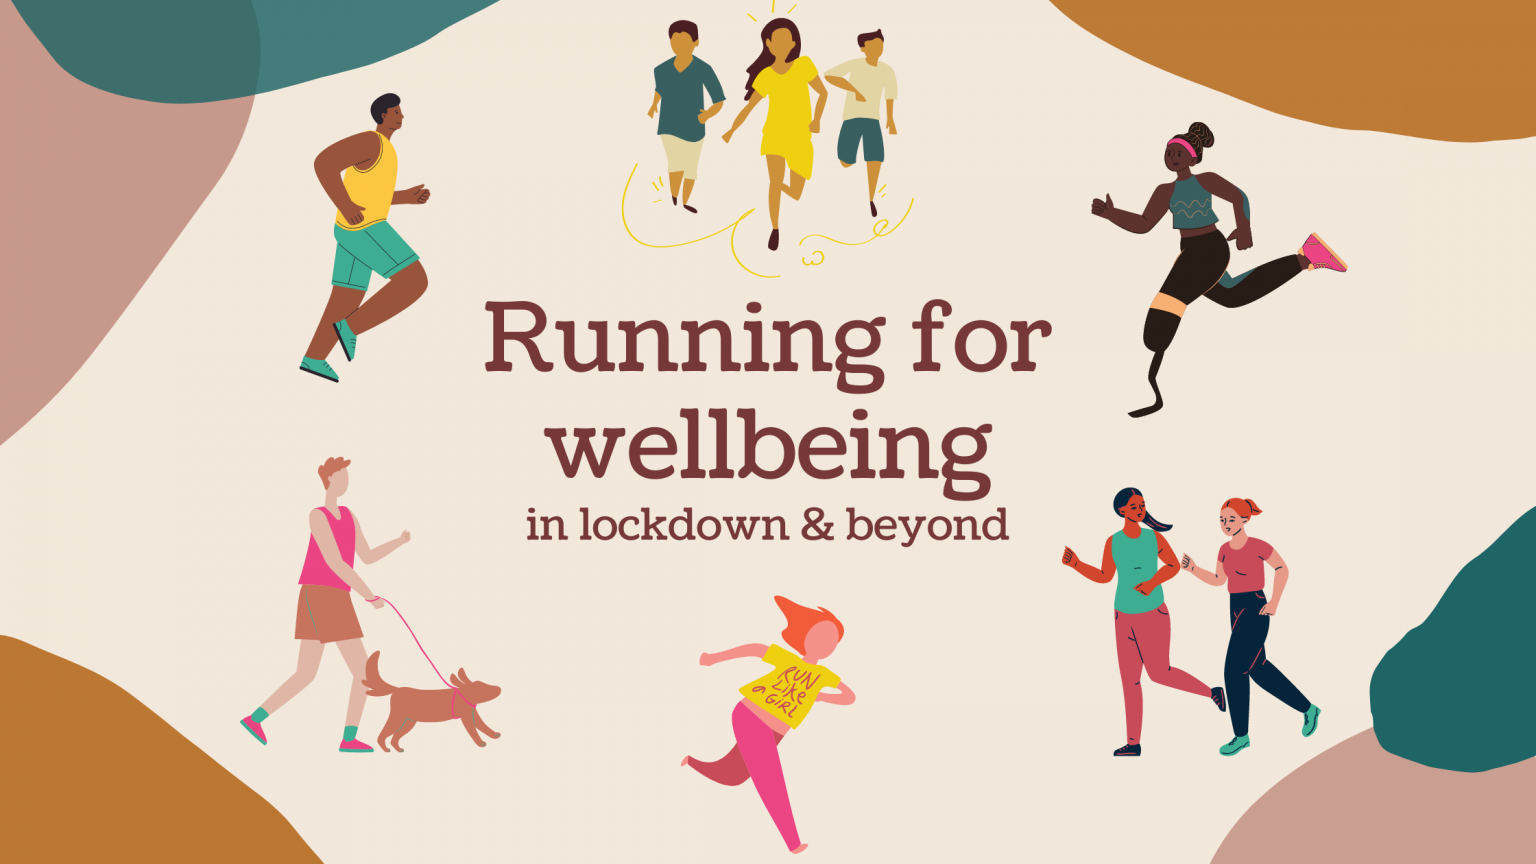 Running for wellbeing in lockdown and beyond